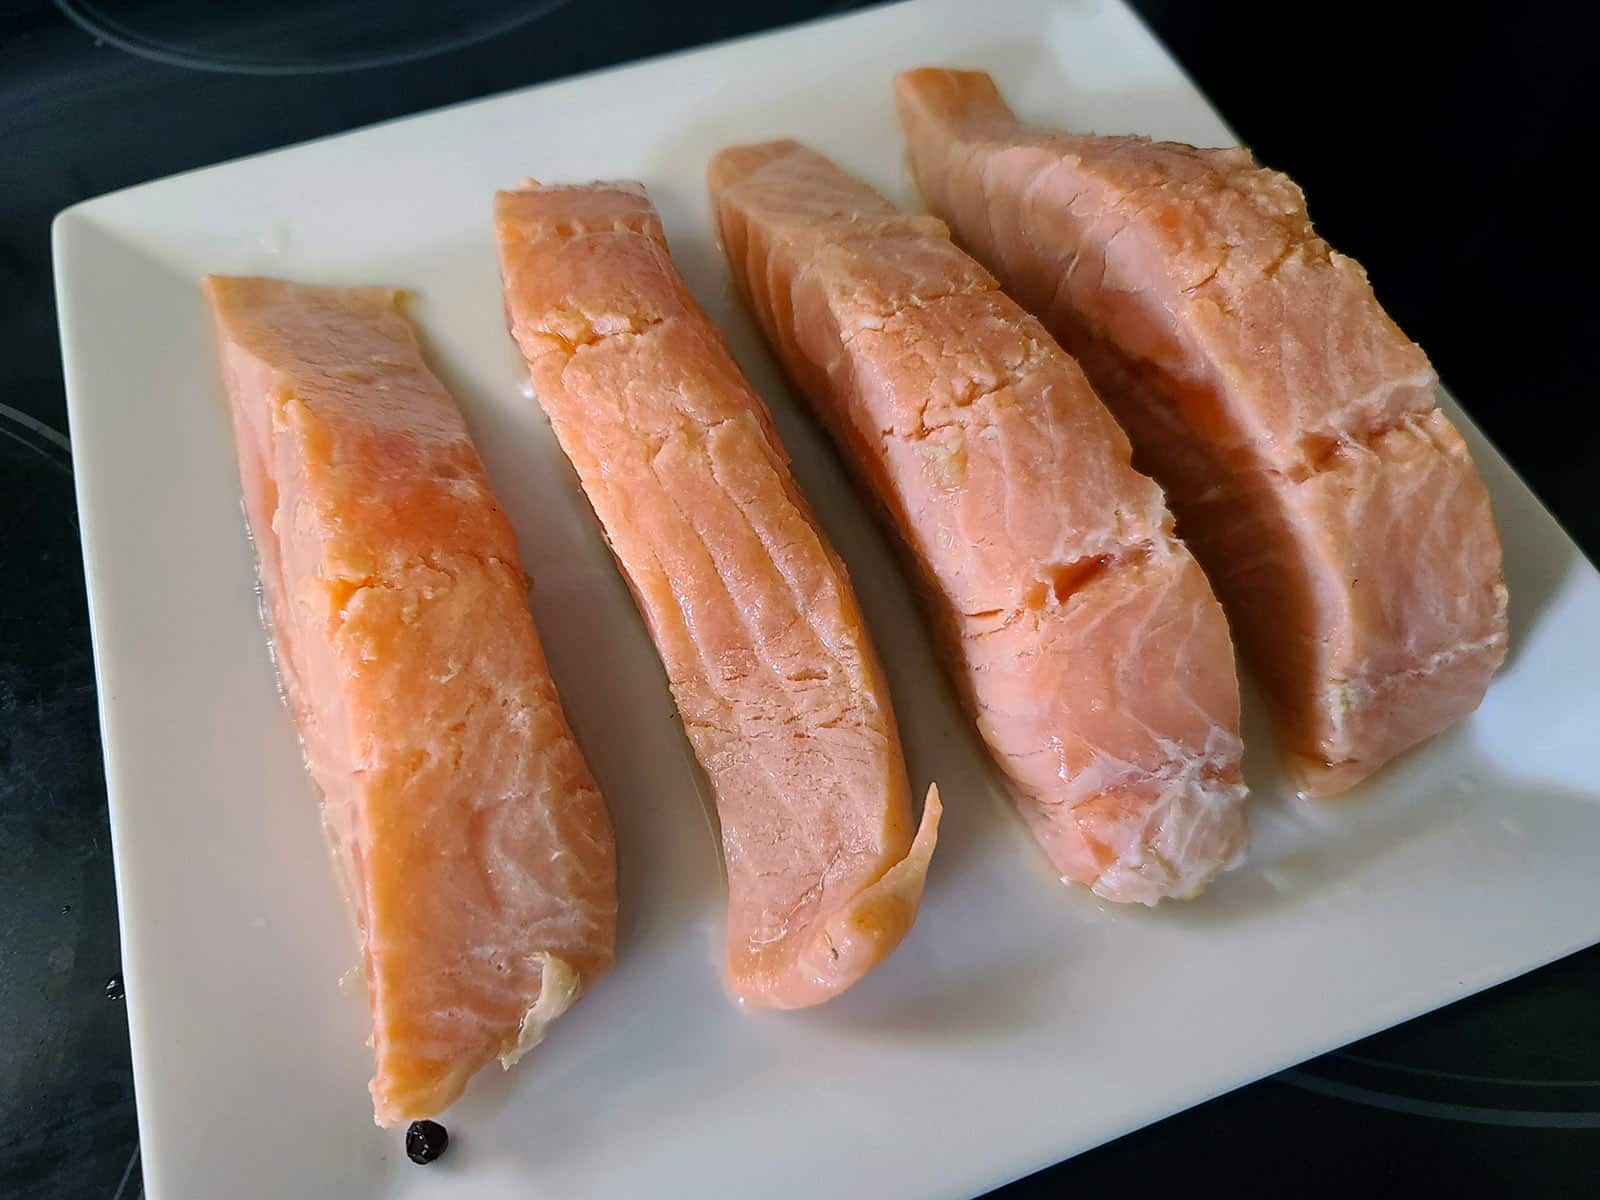 4 sections of brined salmon on a plate.